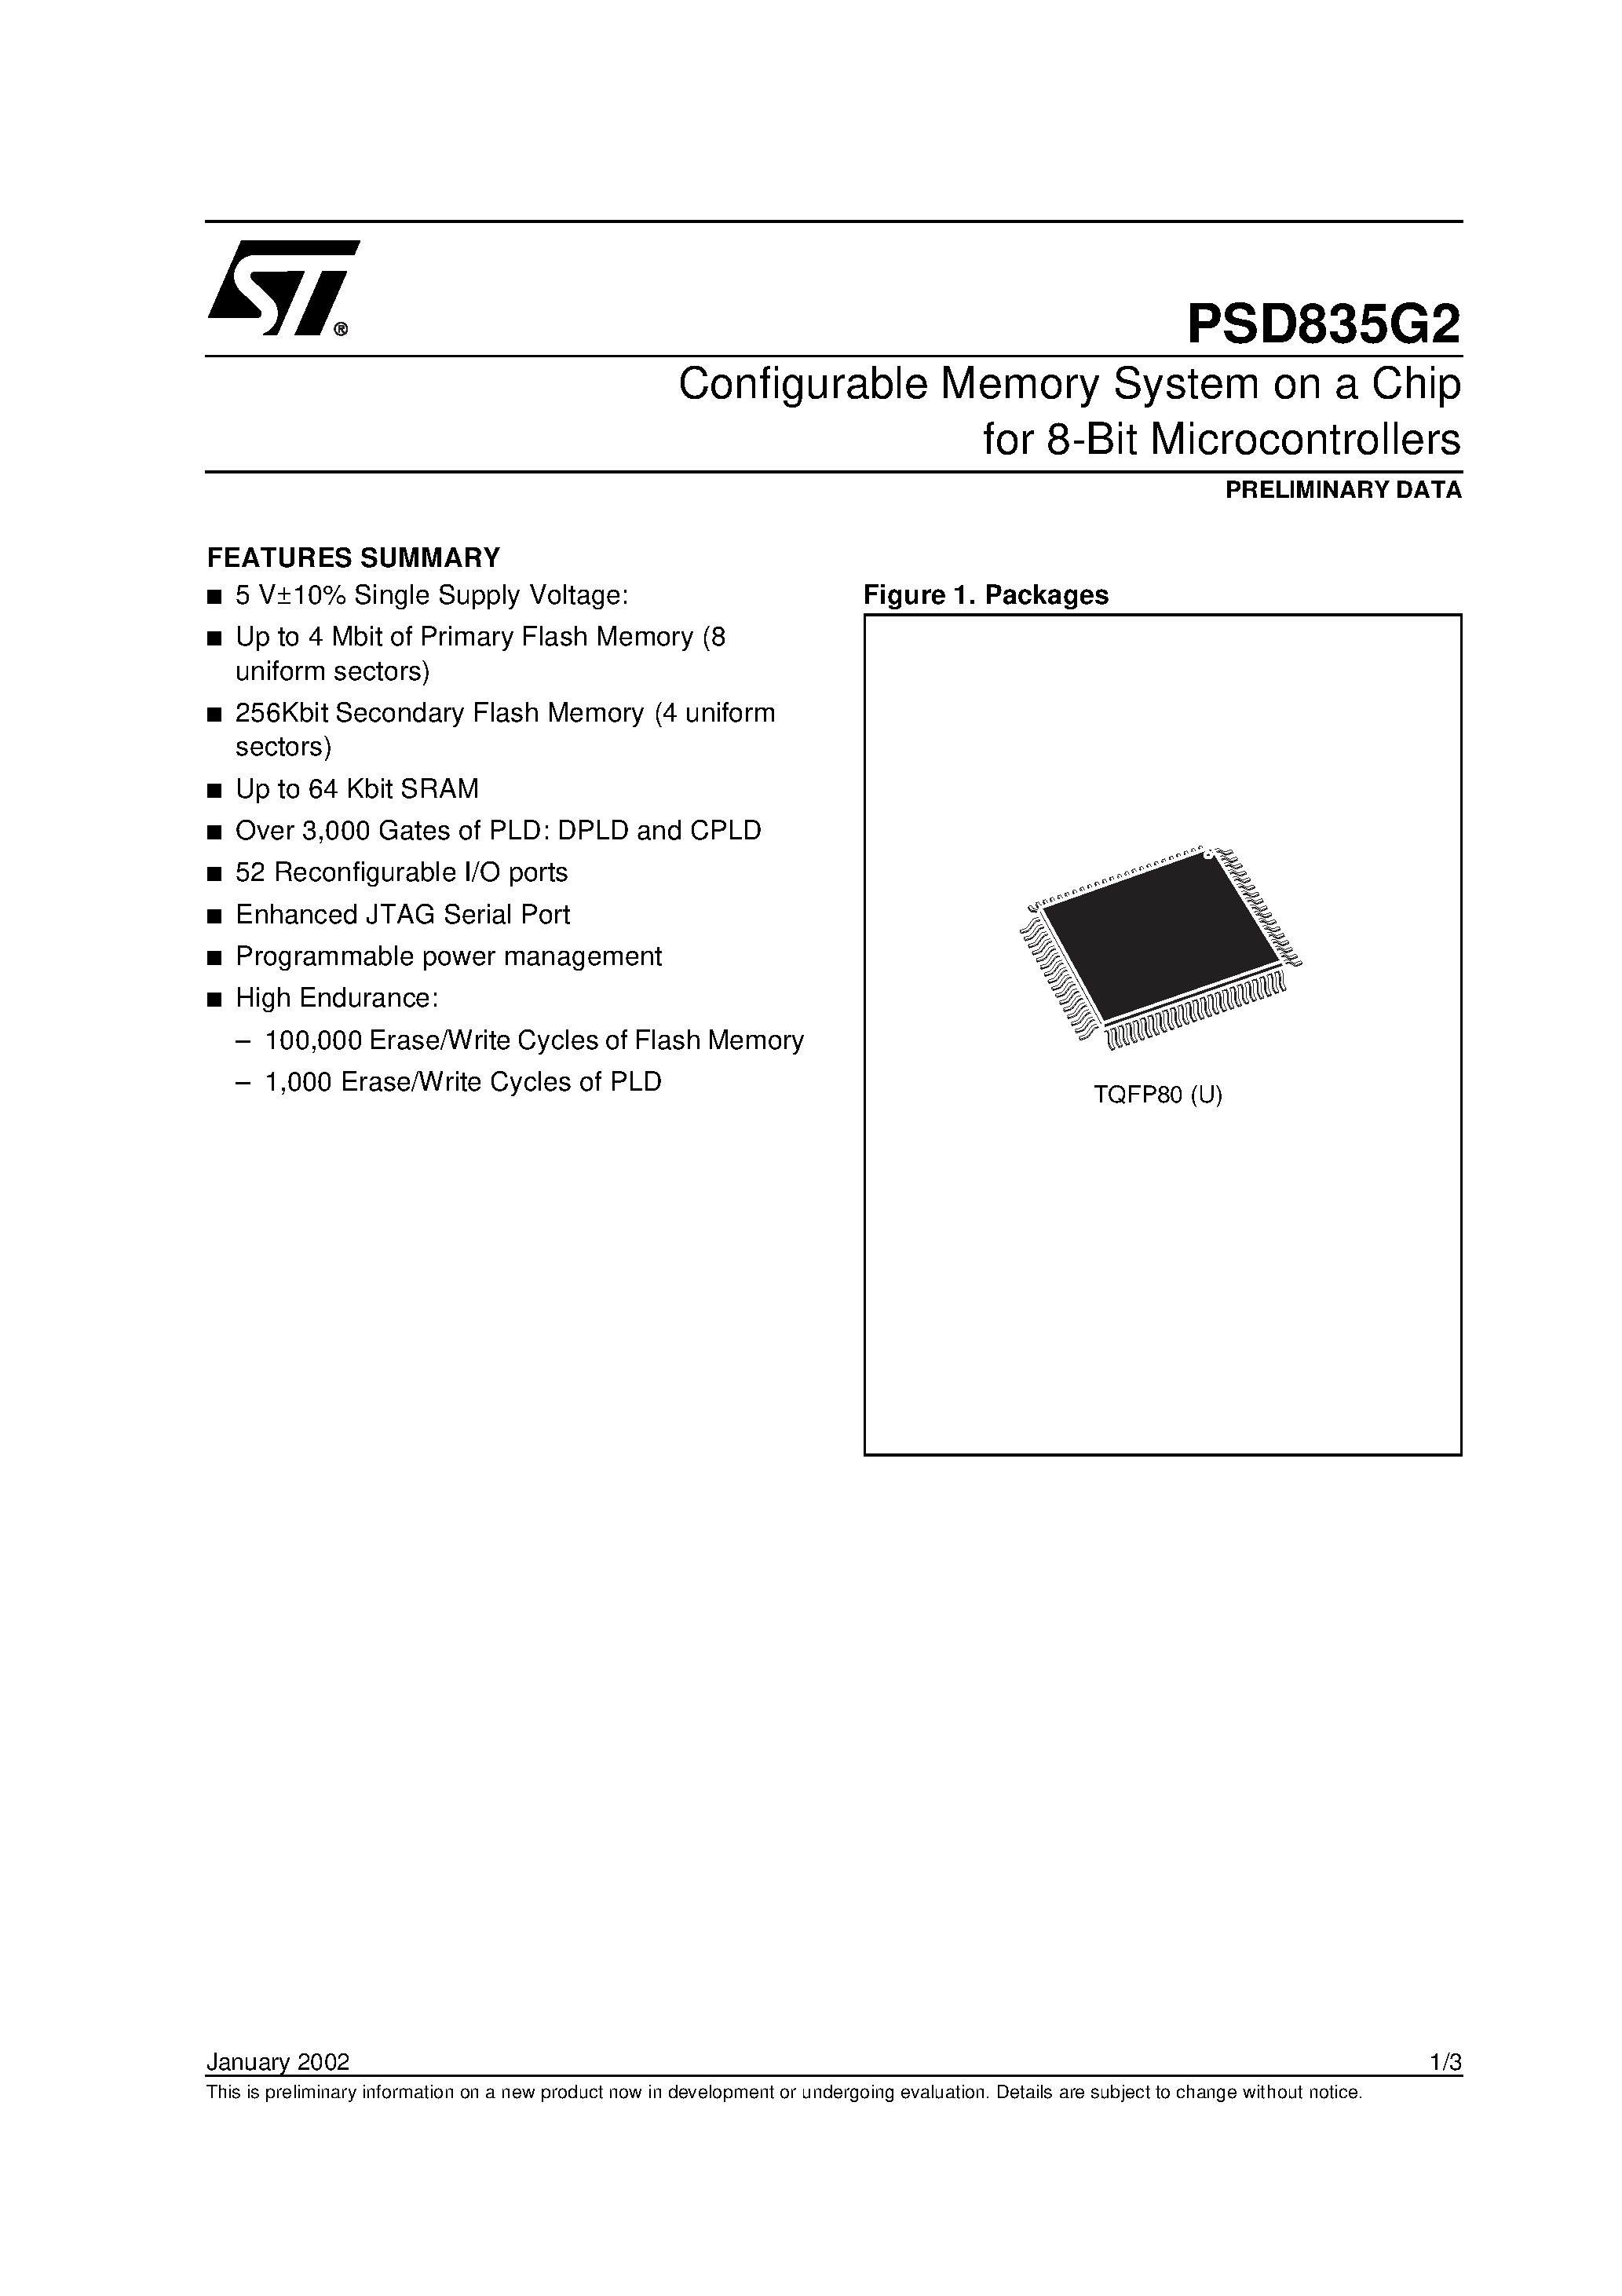 Datasheet PSD835F2-A-90M - Configurable Memory System on a Chip for 8-Bit Microcontrollers page 1